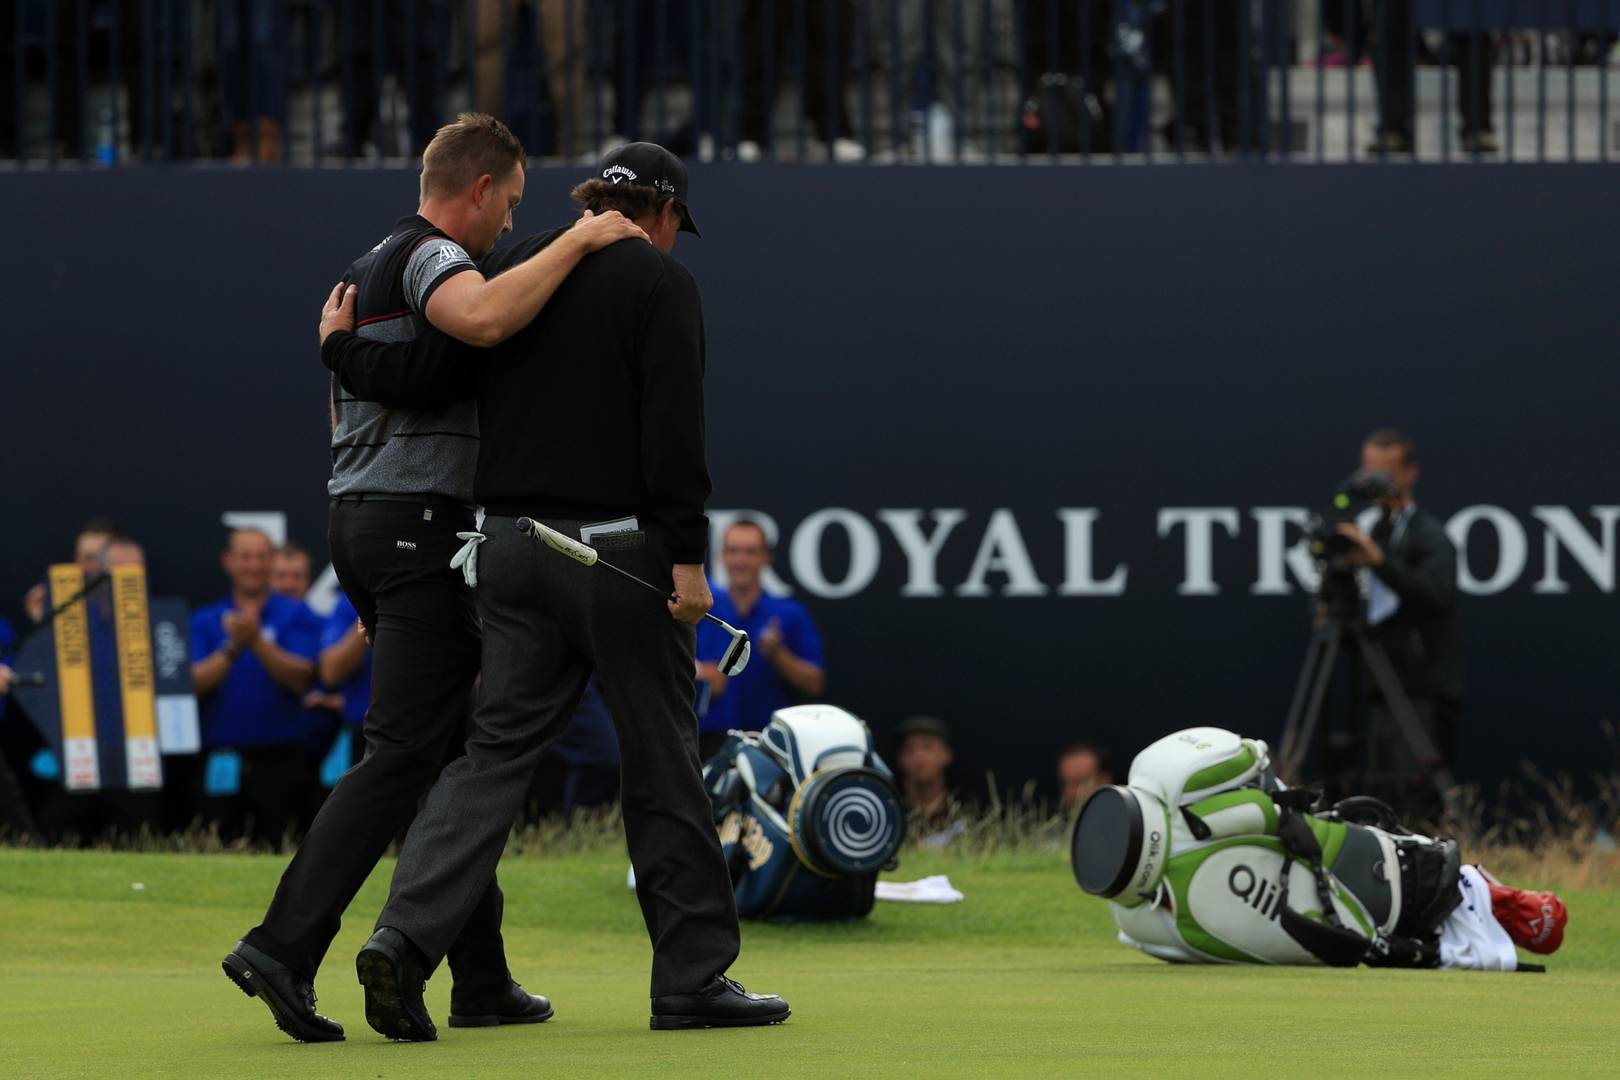 Henrik Stenson and Phil Mickelson at Royal Troon